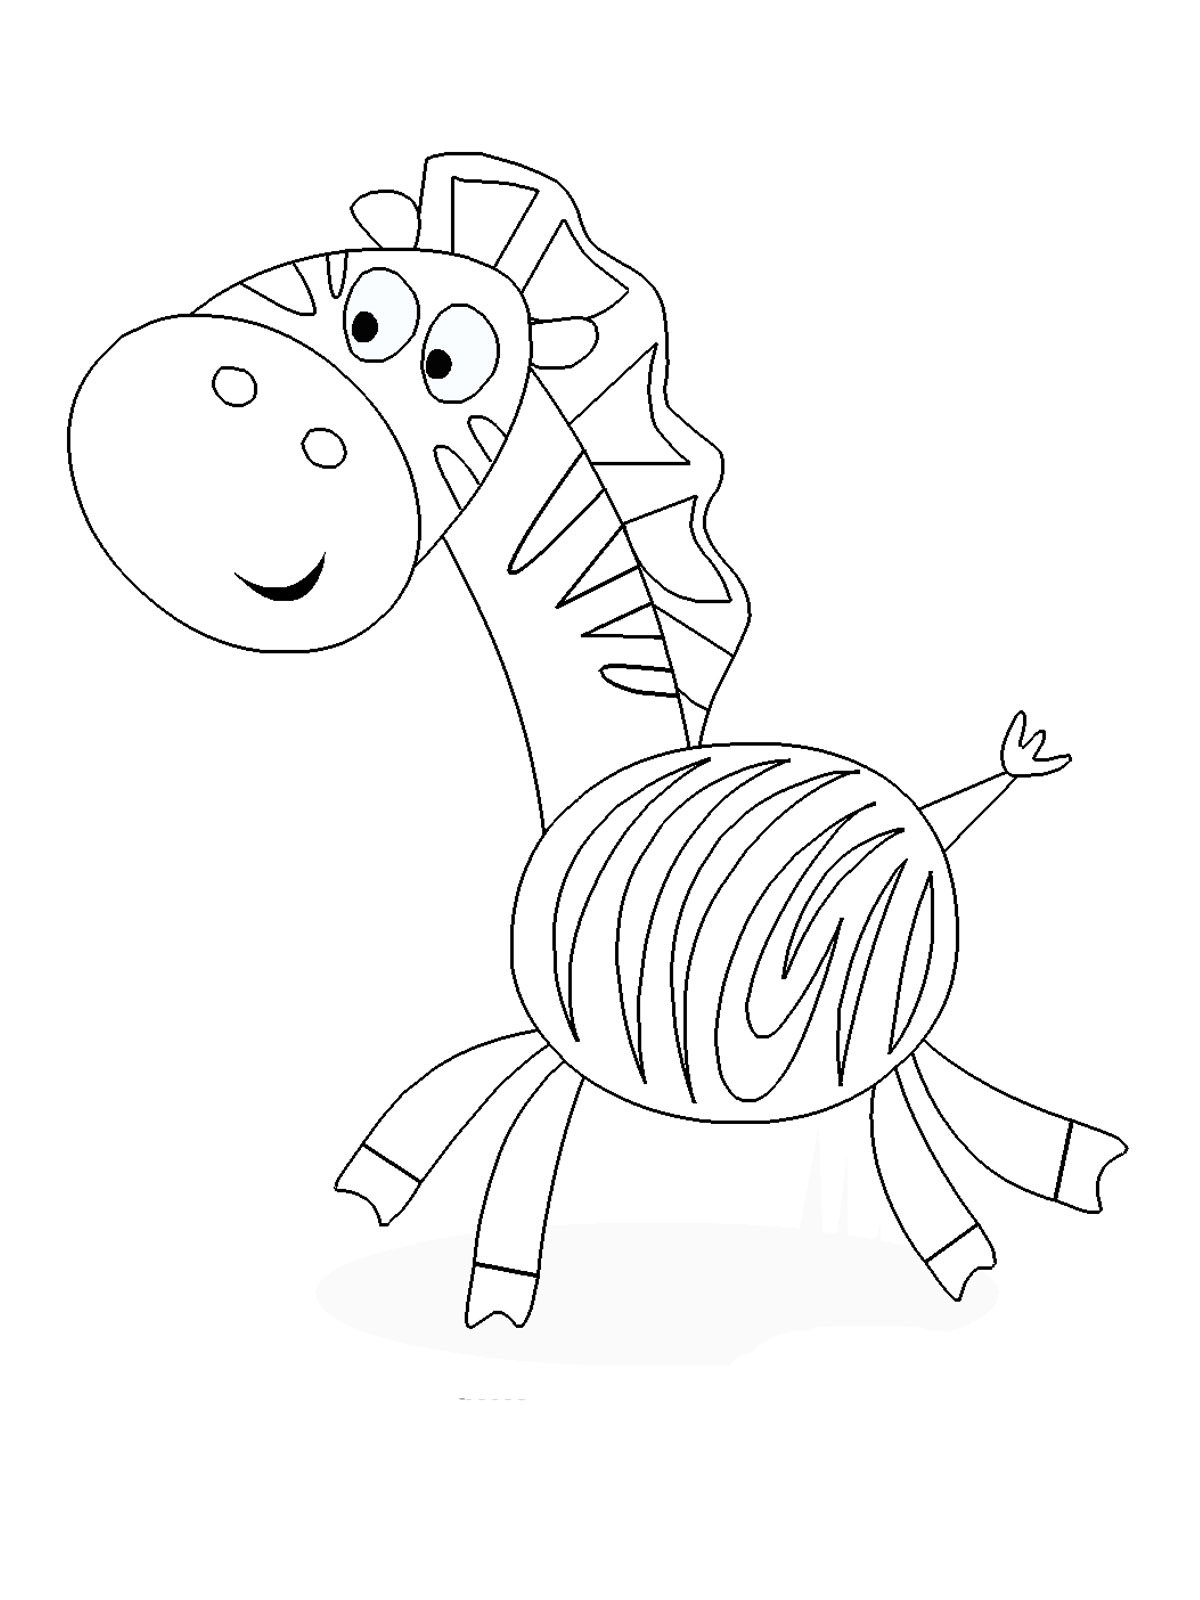 Online Coloring For Kids
 Printable coloring pages for kids